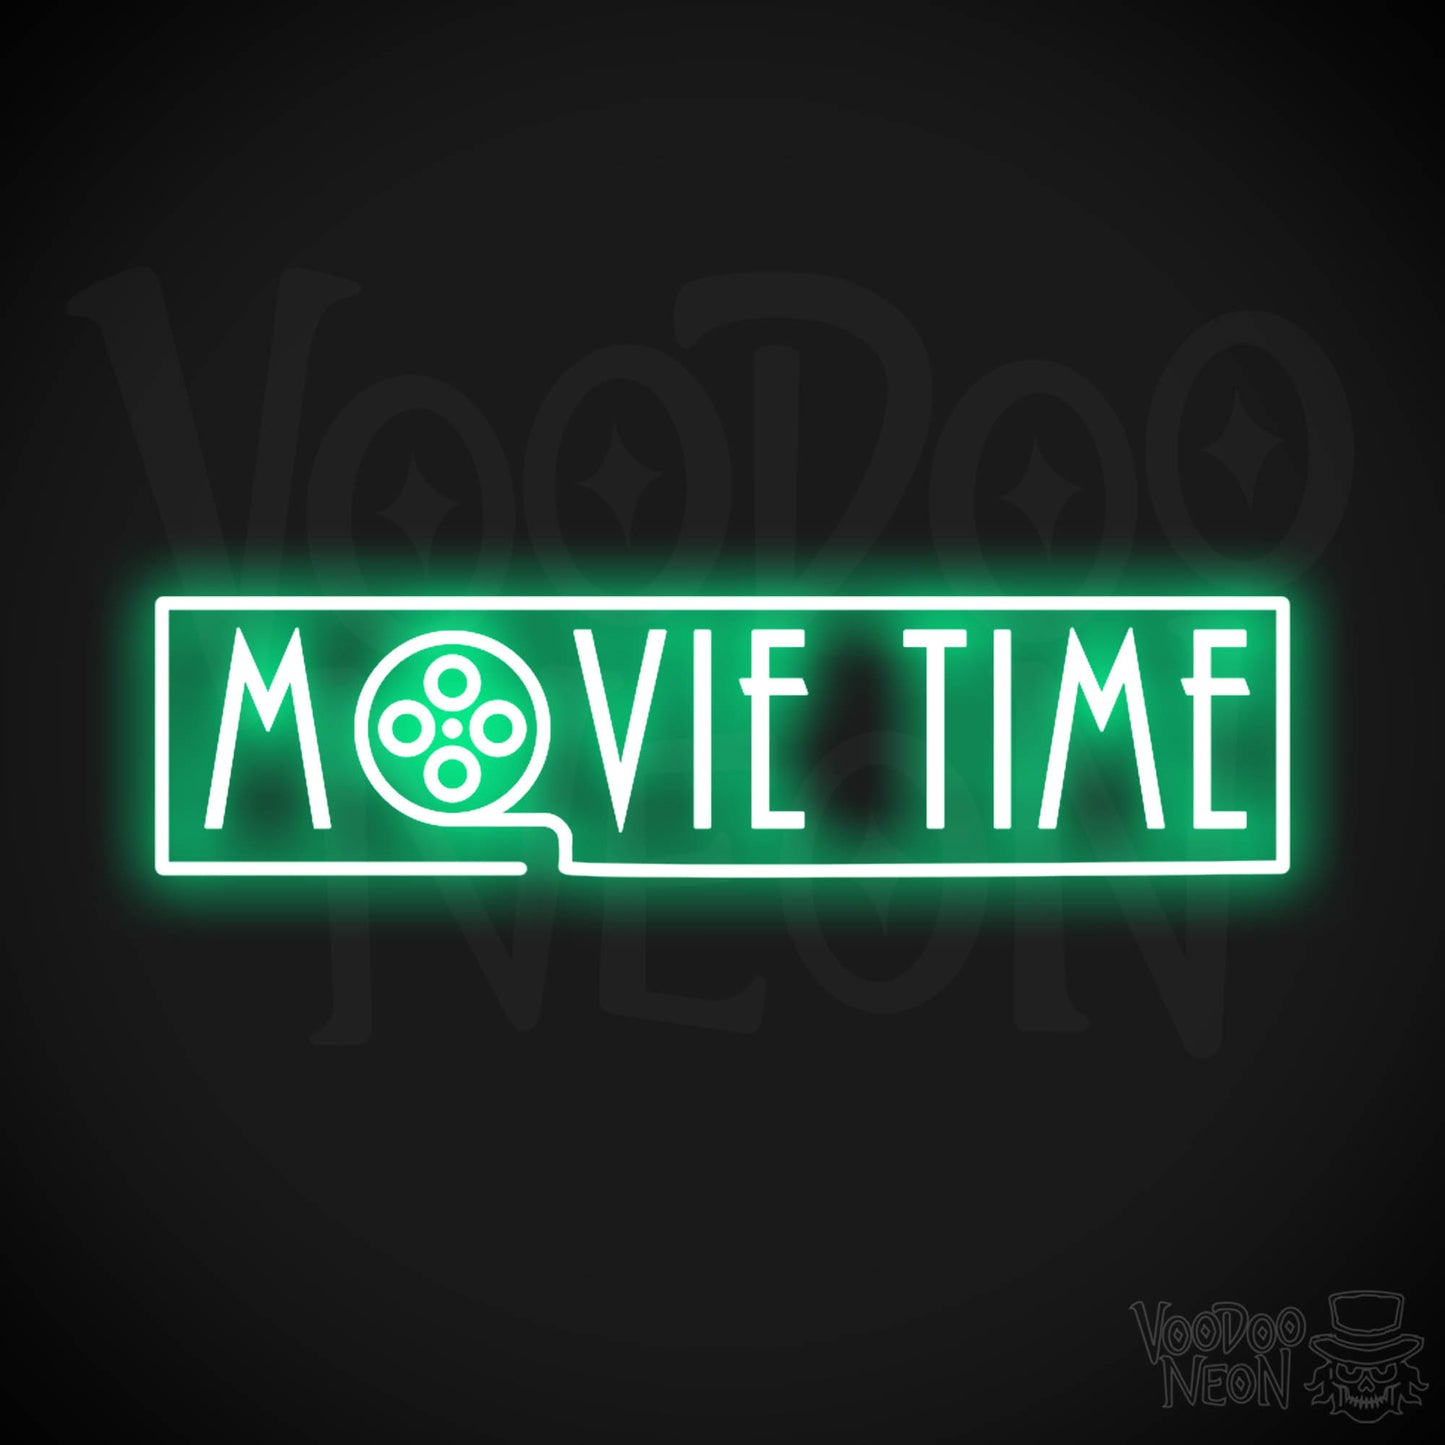 Movie Time Neon Sign - Neon Movie Time Sign - Color Green